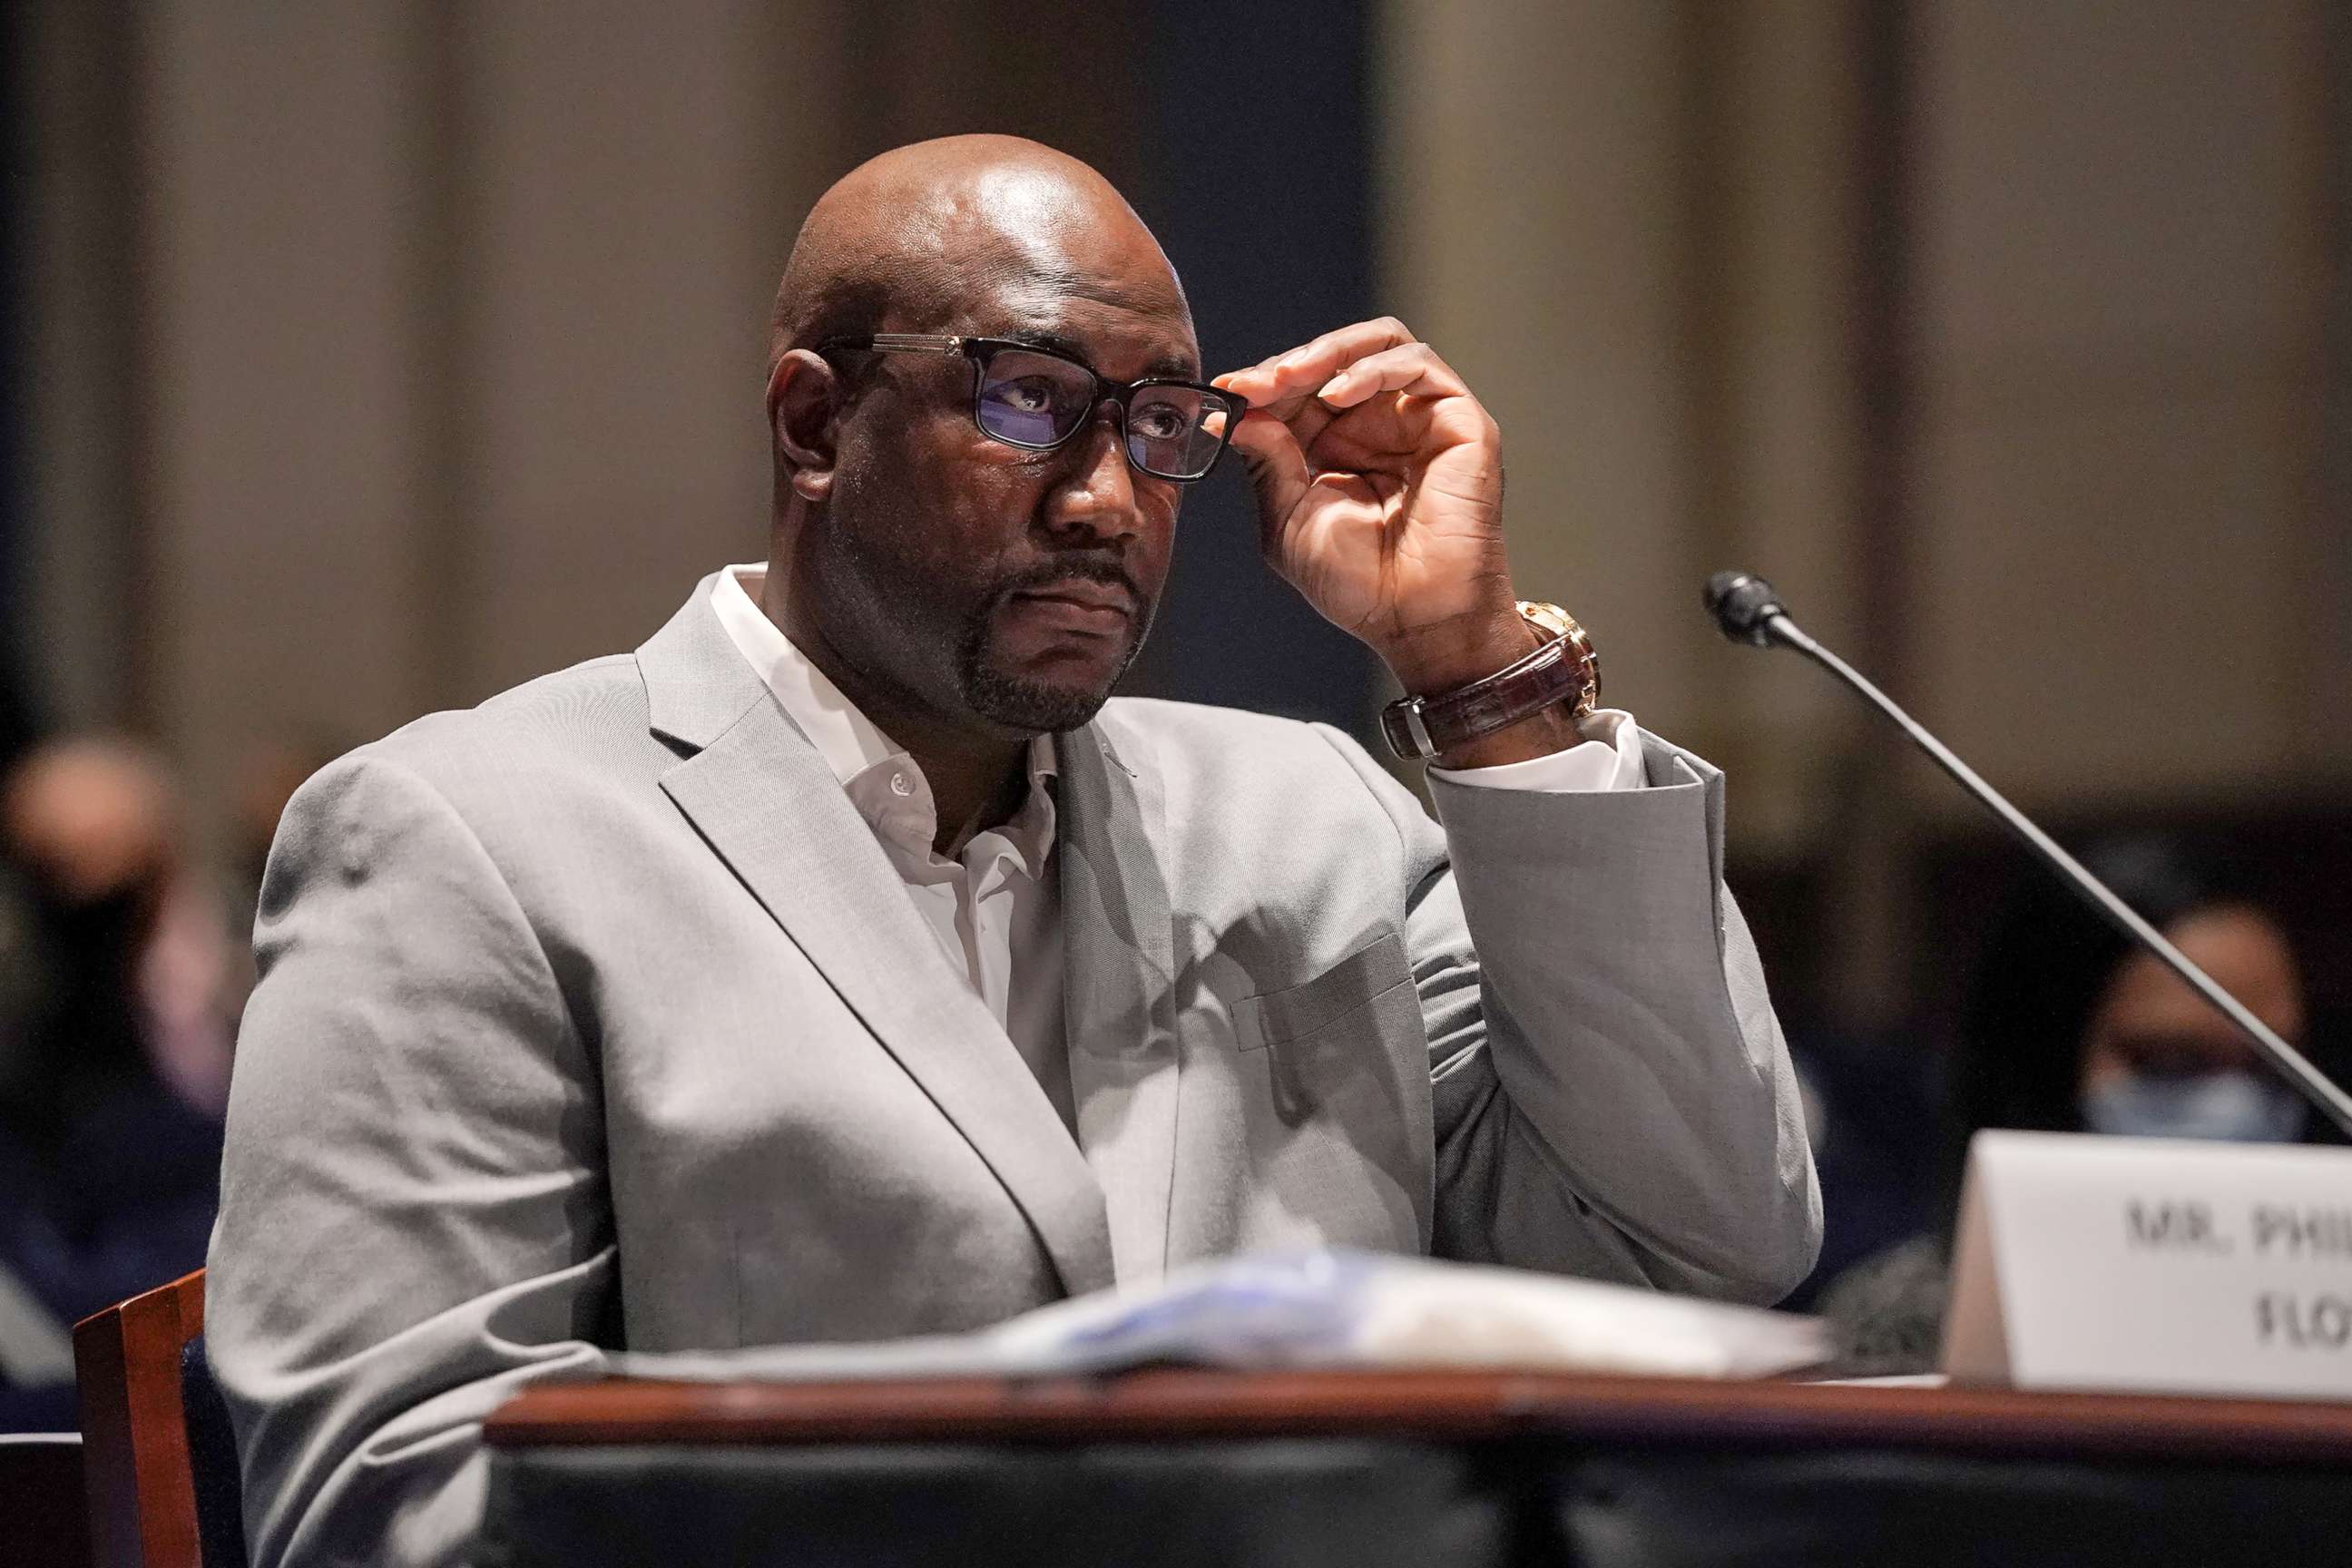 PHOTO: Philonise Floyd, brother of George Floyd, testifies before a House Judiciary Committee hearing on police brutality and racial profiling on June 10, 2020 in Washington, D.C. 